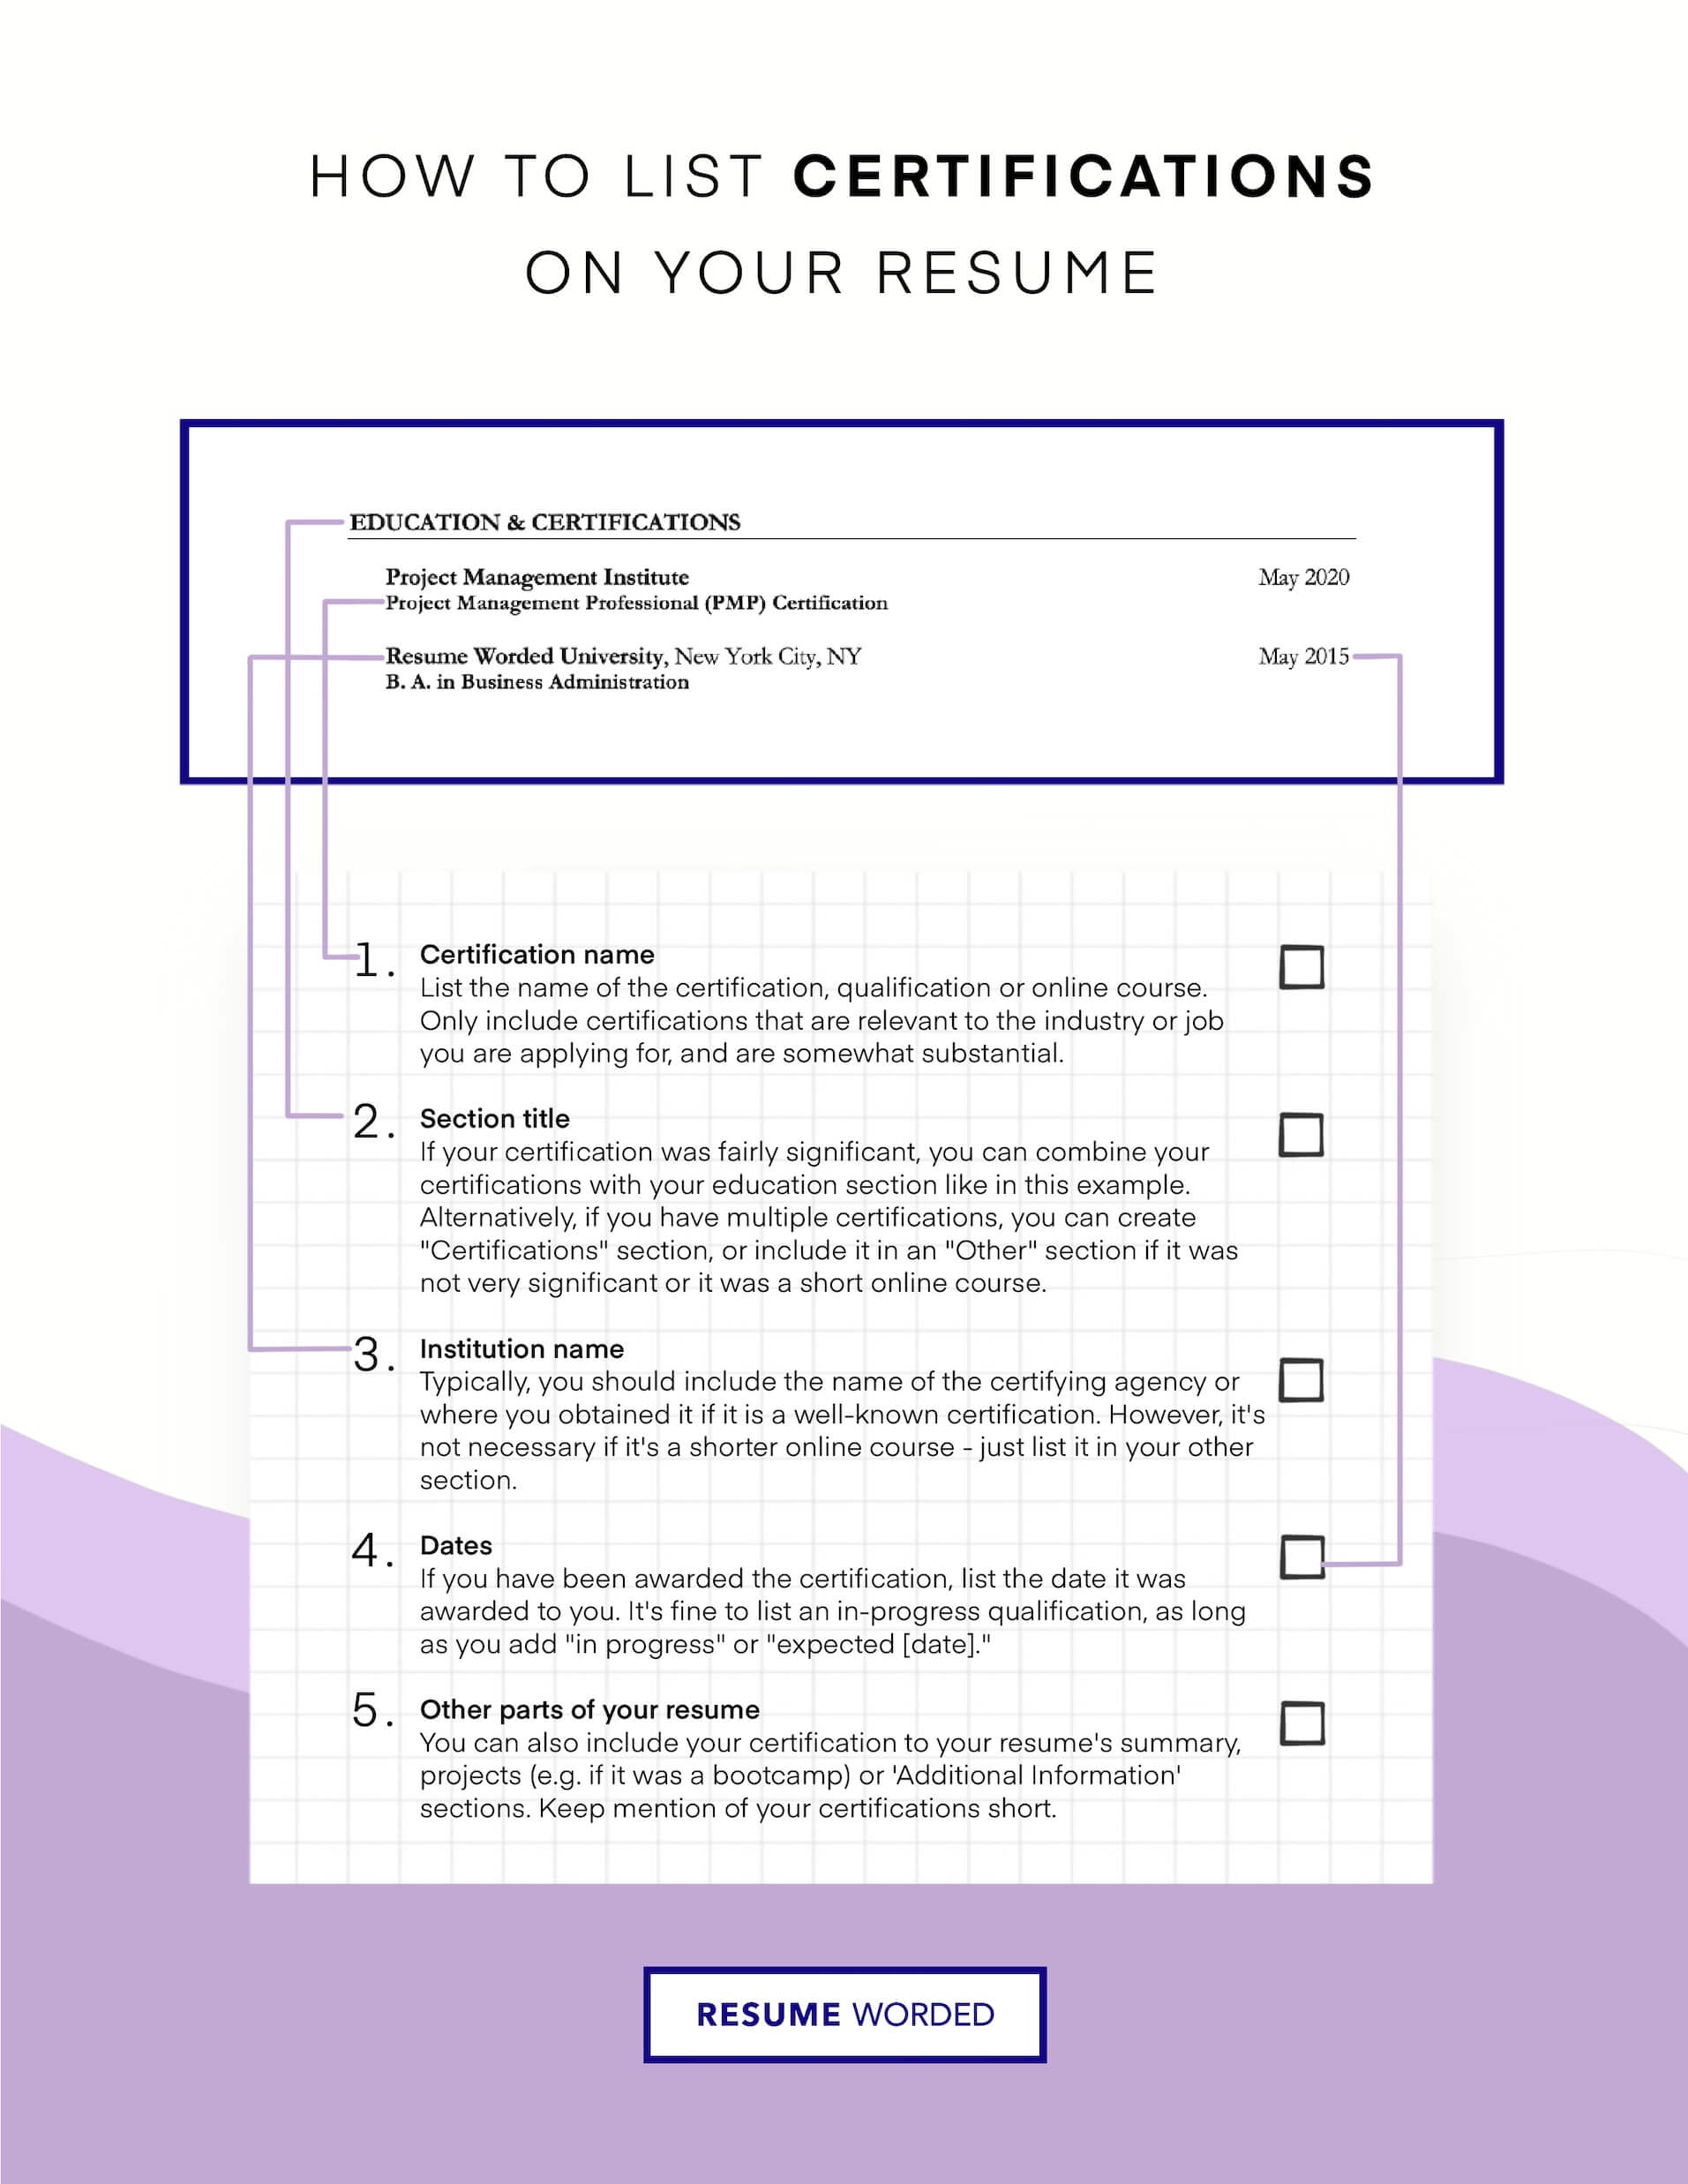 Showcase your technical certifications - Technical Operations Manager Resume